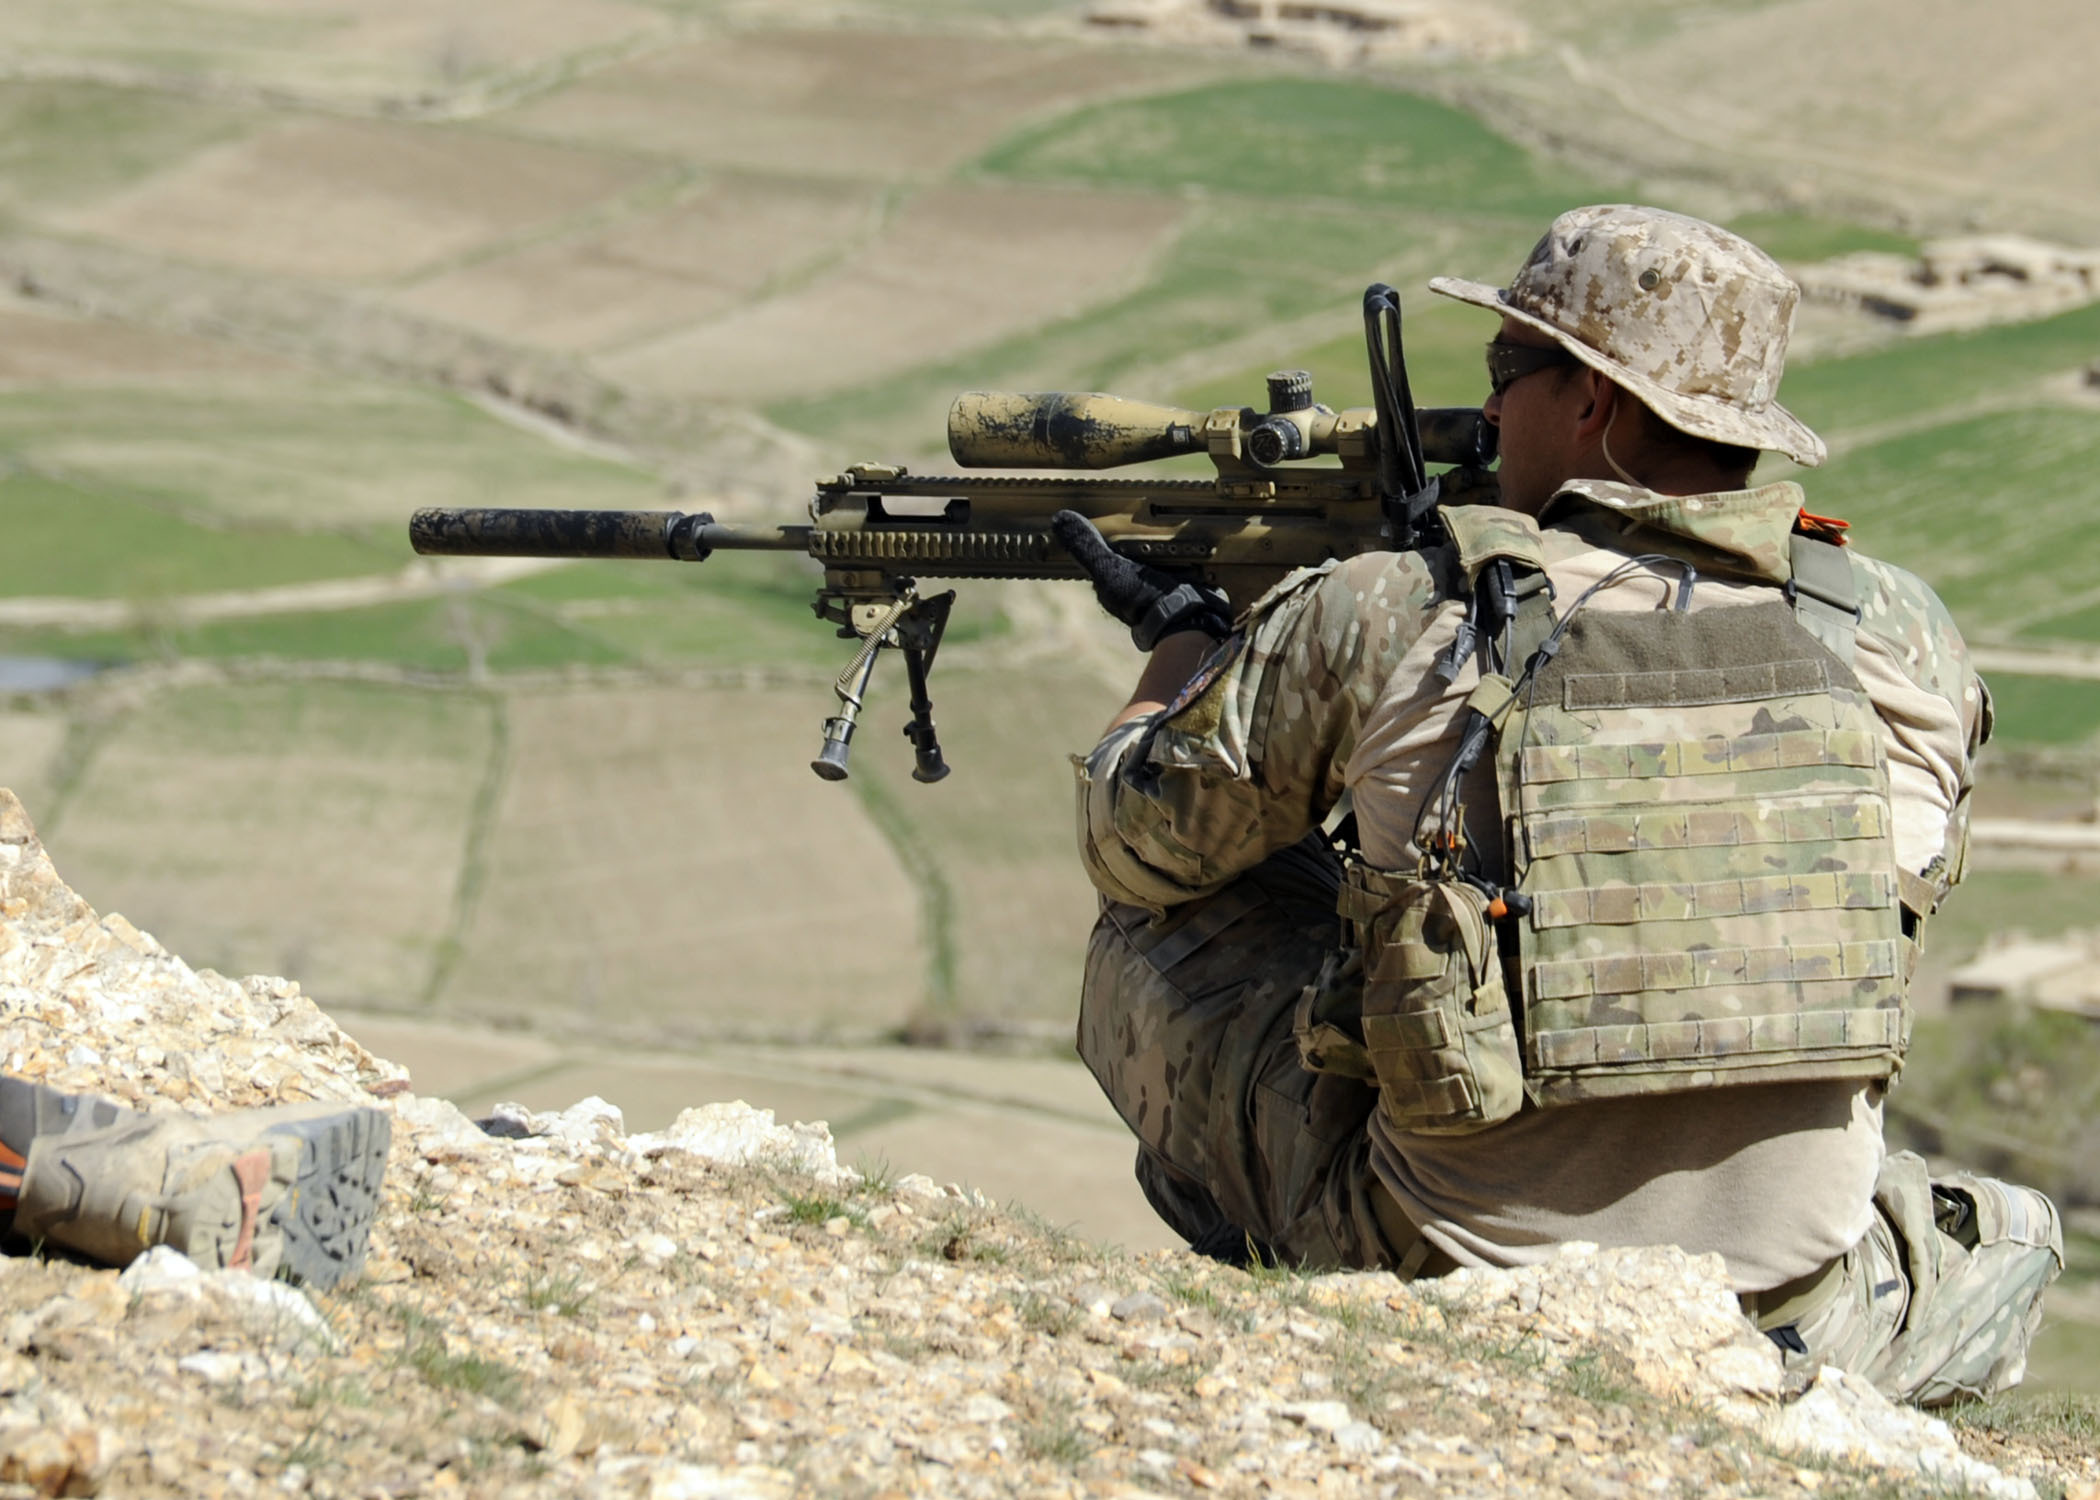 A_coalition_Special_Operations_Forces_member_fires_his_sniper_rifle_from_a_hilltop_during_a_firefight_near_Nawa_Garay_village_%28120403-N-MY805-202%29.jpg